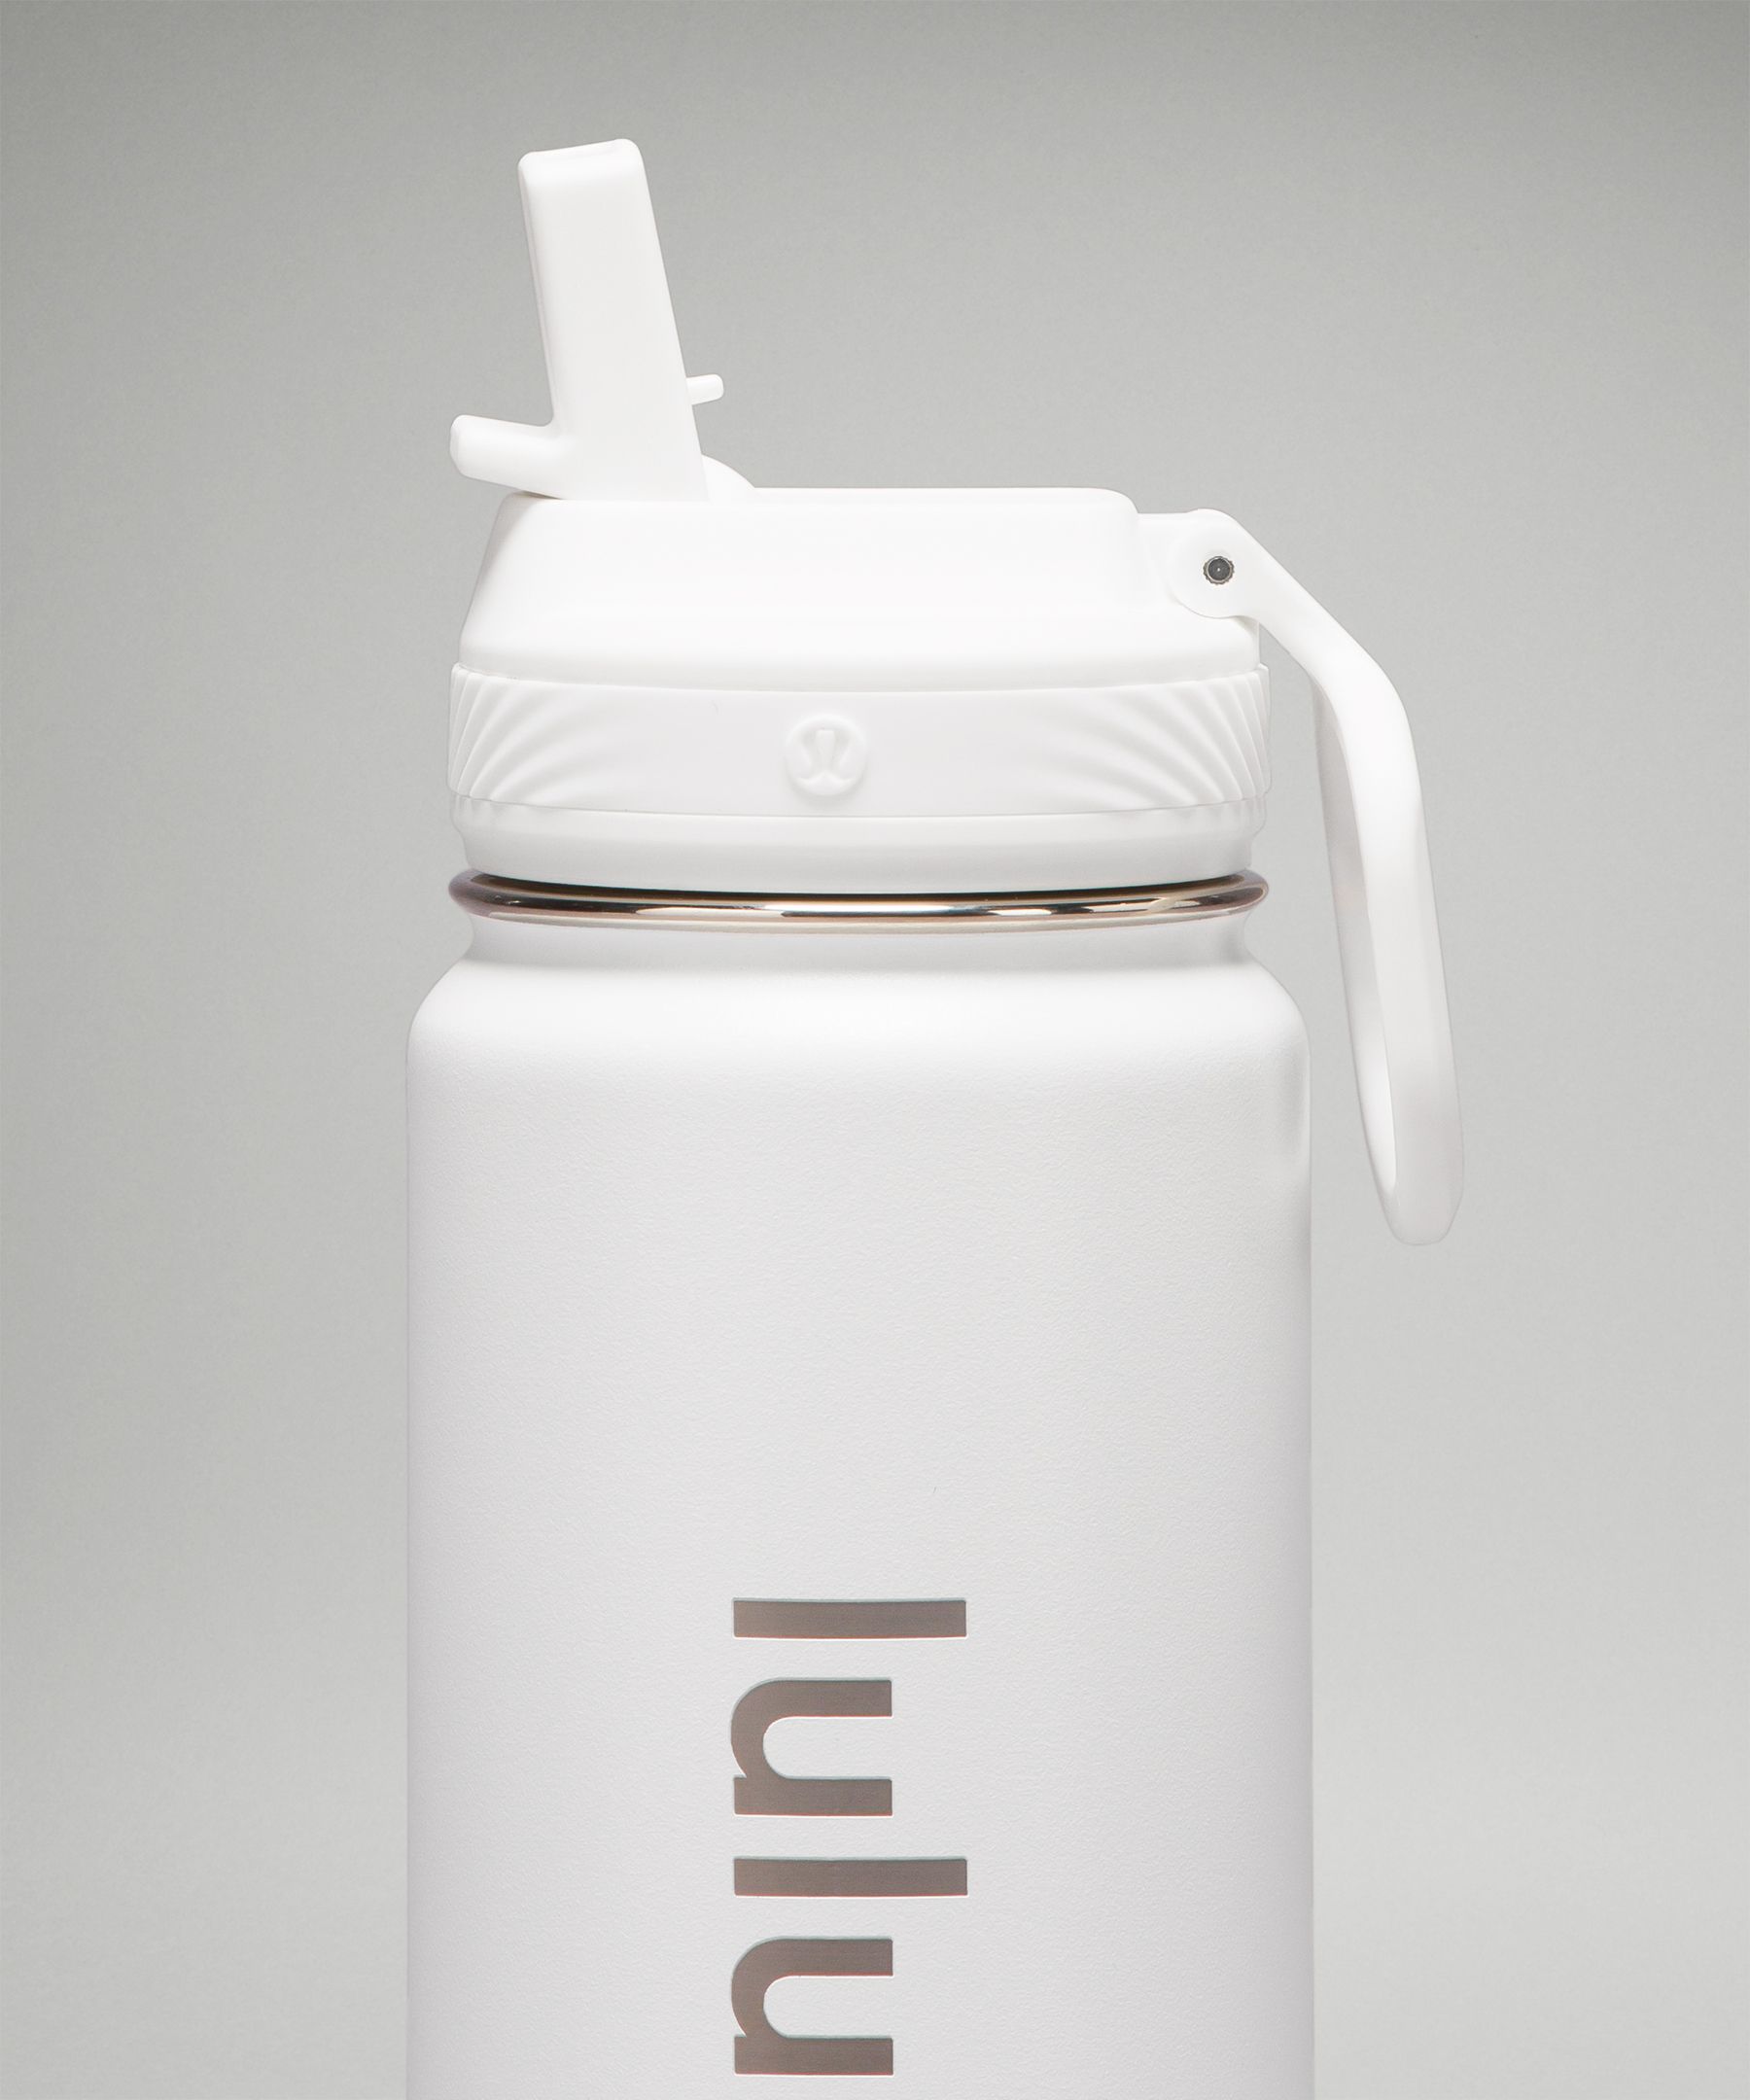 IN STOCK] Lululemon Sports Water Bottle Outdoor Thermal Water Cup